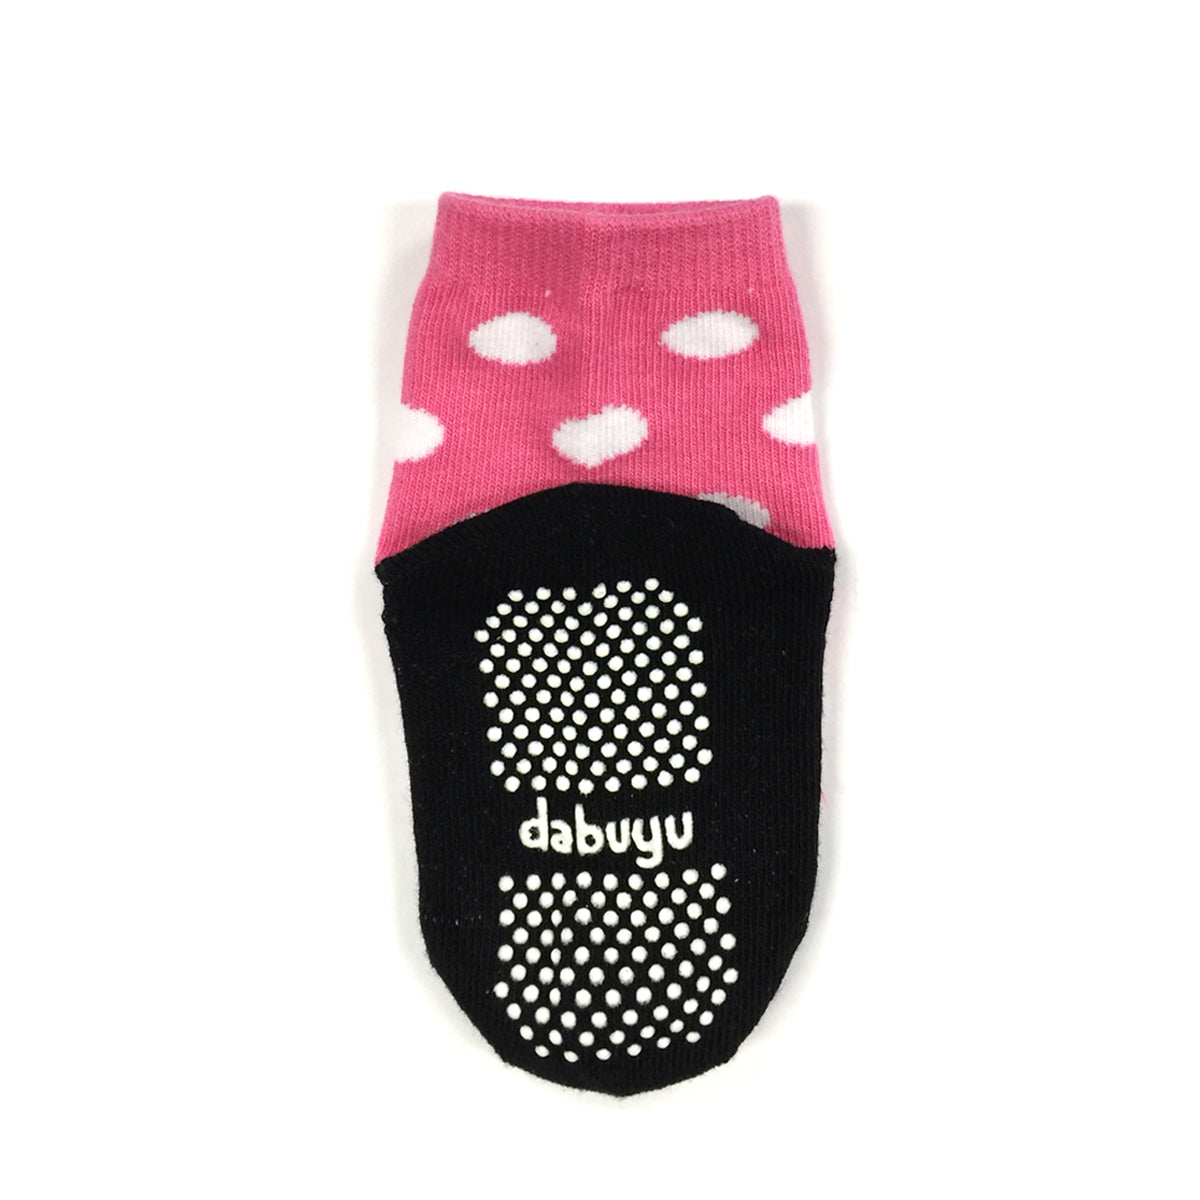 Wrapables Non-Slip Cute Mary Jane Socks for Baby (Set of 5)